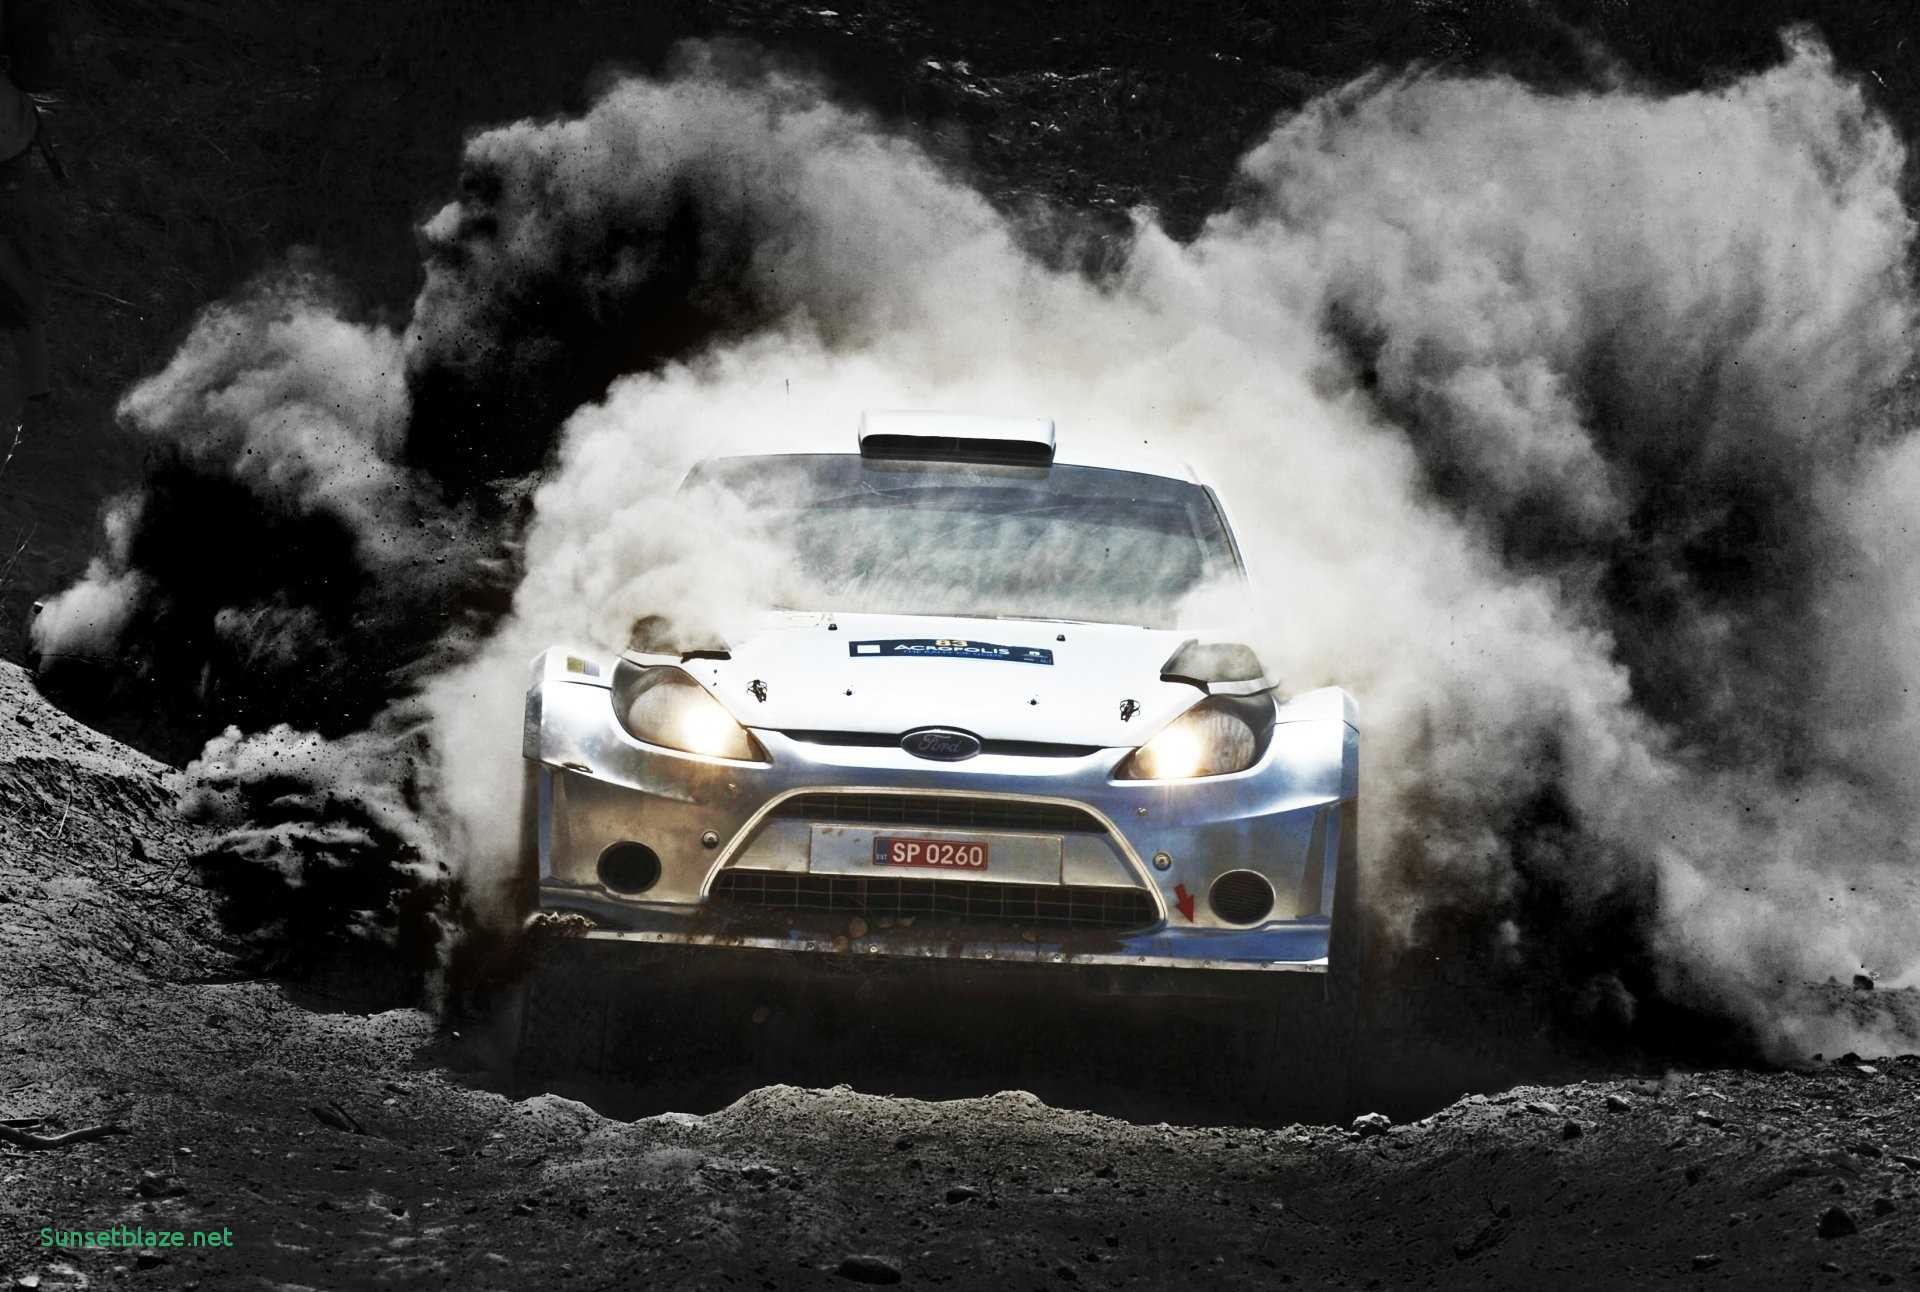 1920x1292 Wrc Wallpapers Hd 69 Images Awesome Of Rally Car Wallpaper Hd